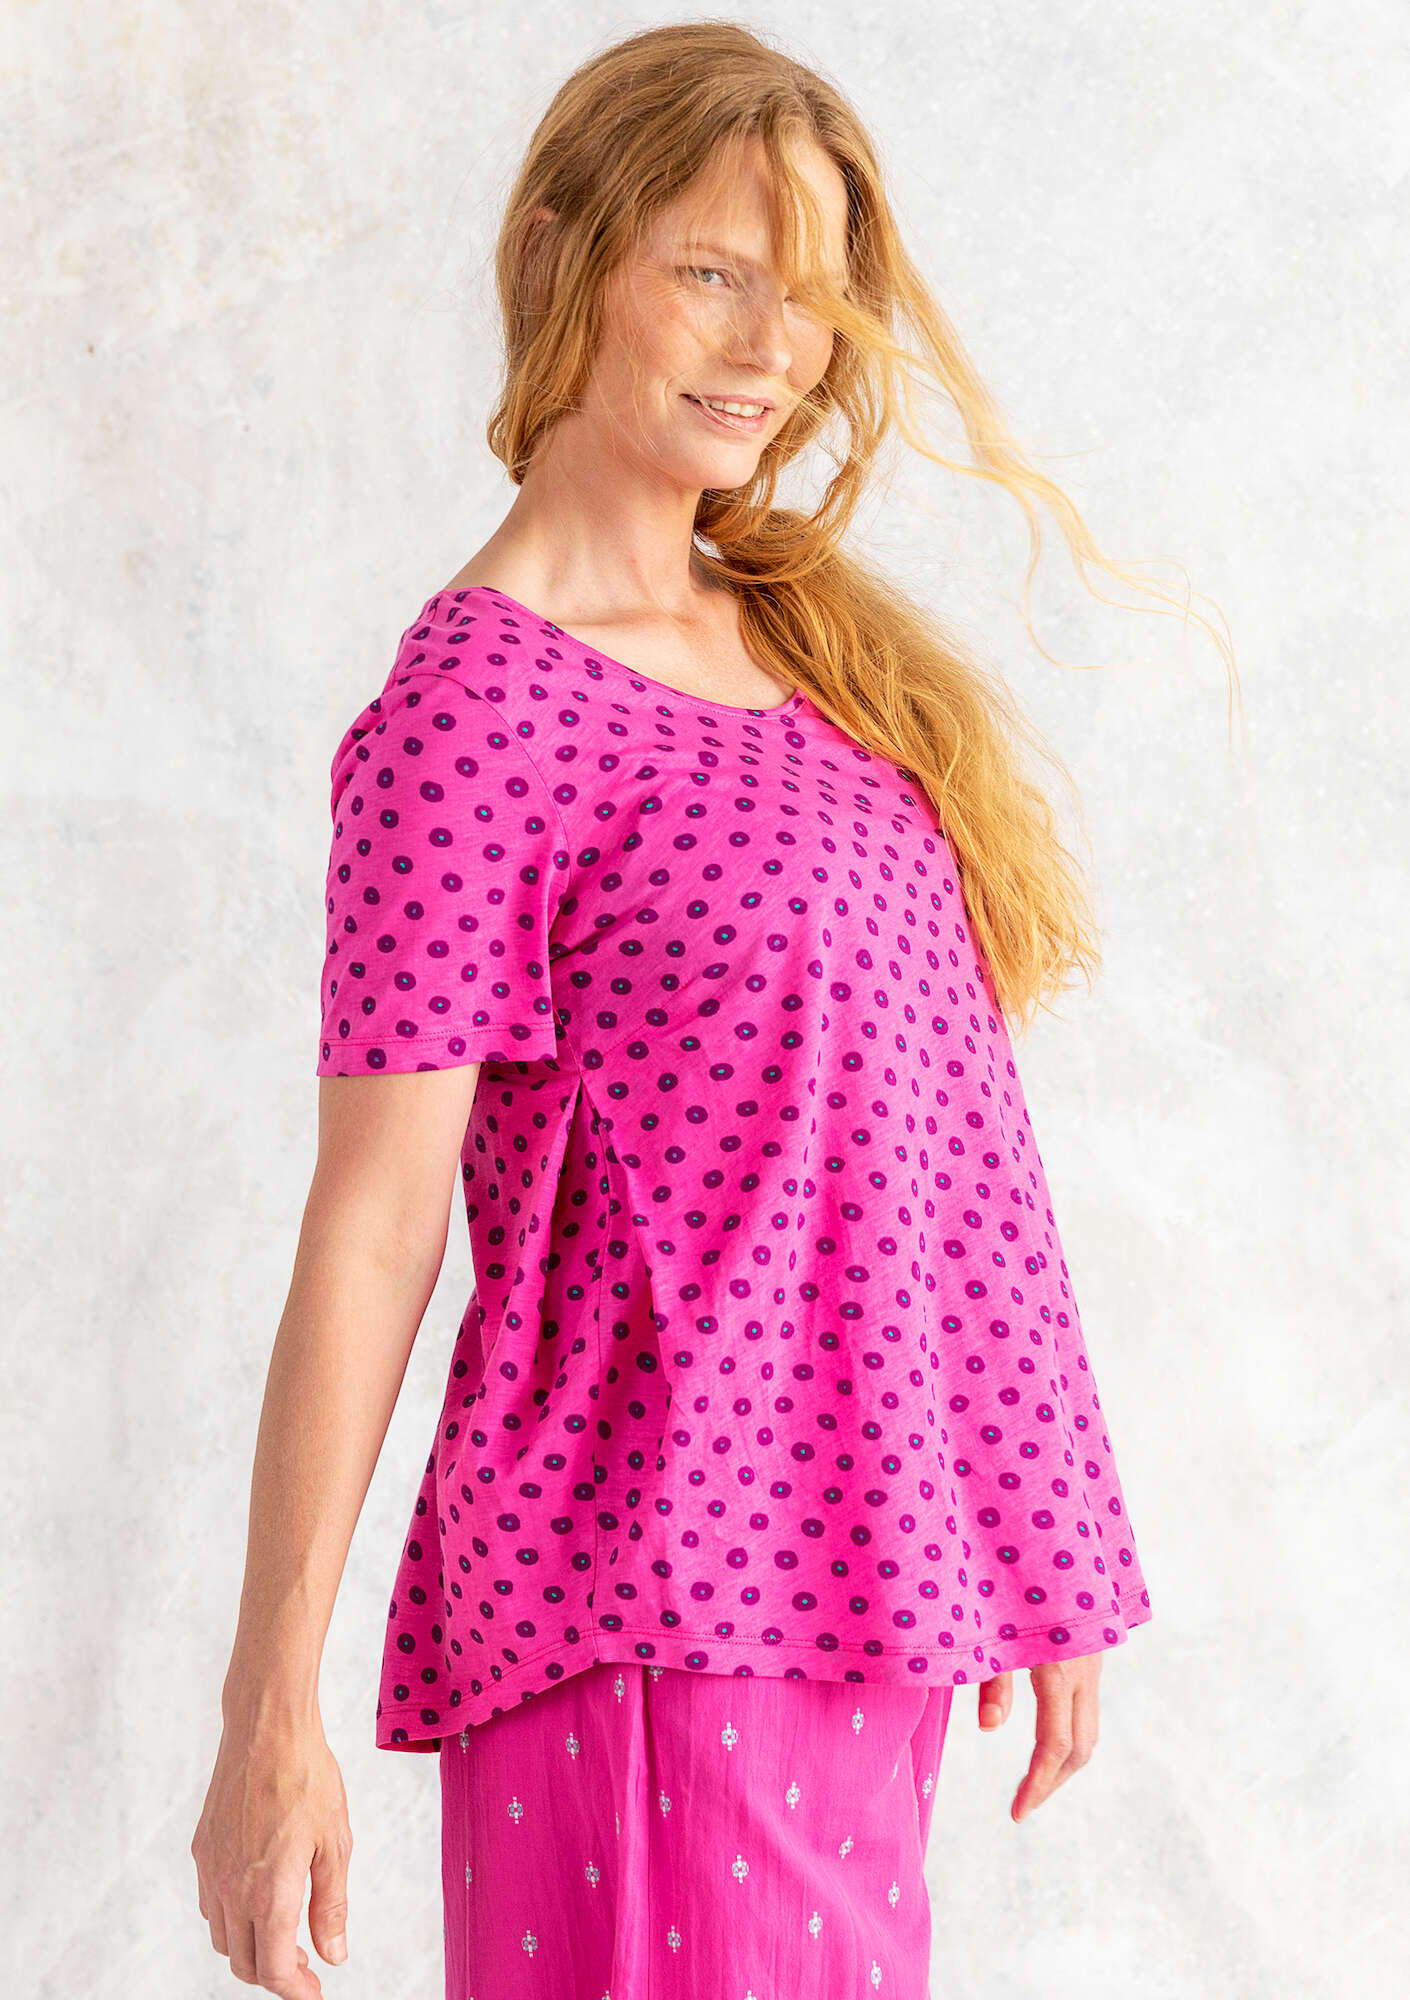 Tricot top Ines wild rose/patterned